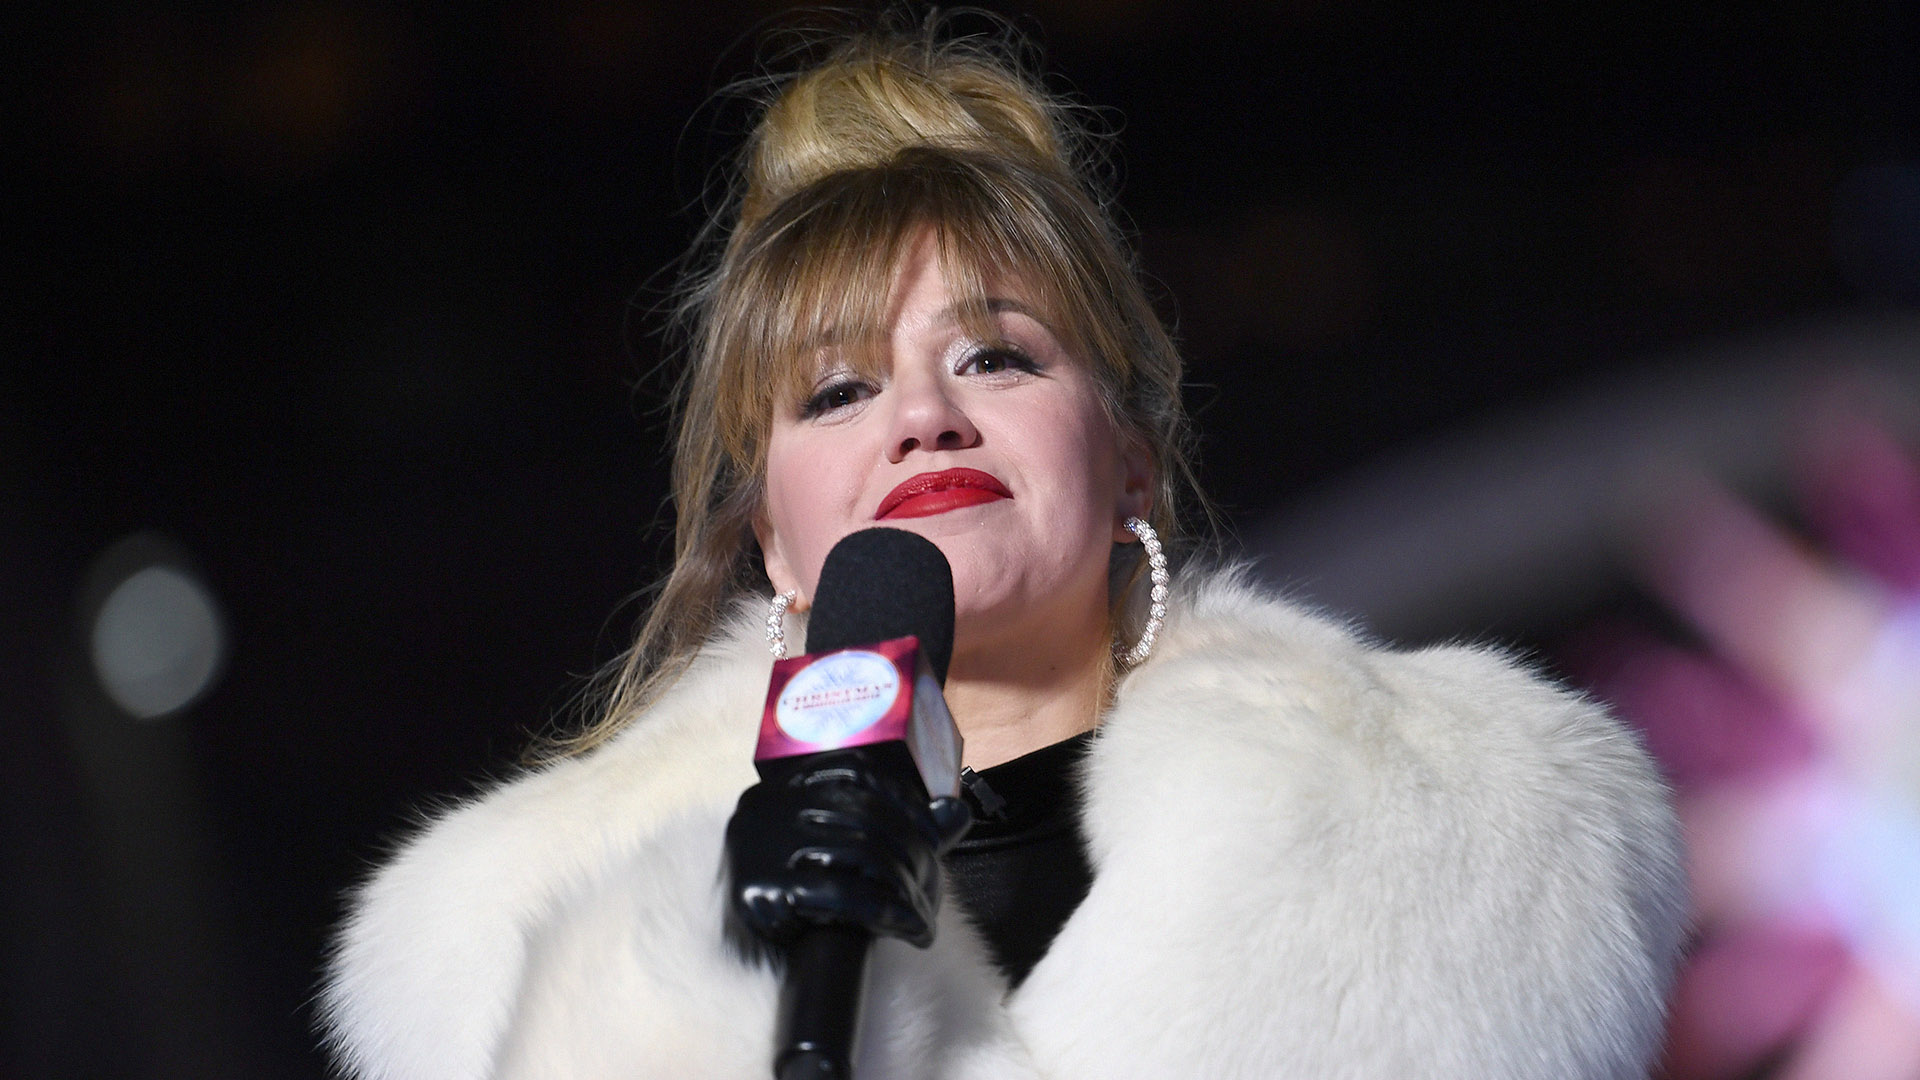 Kelly Clarkson's Career Was Almost Nipped in the Bud by a Dangerous Accident